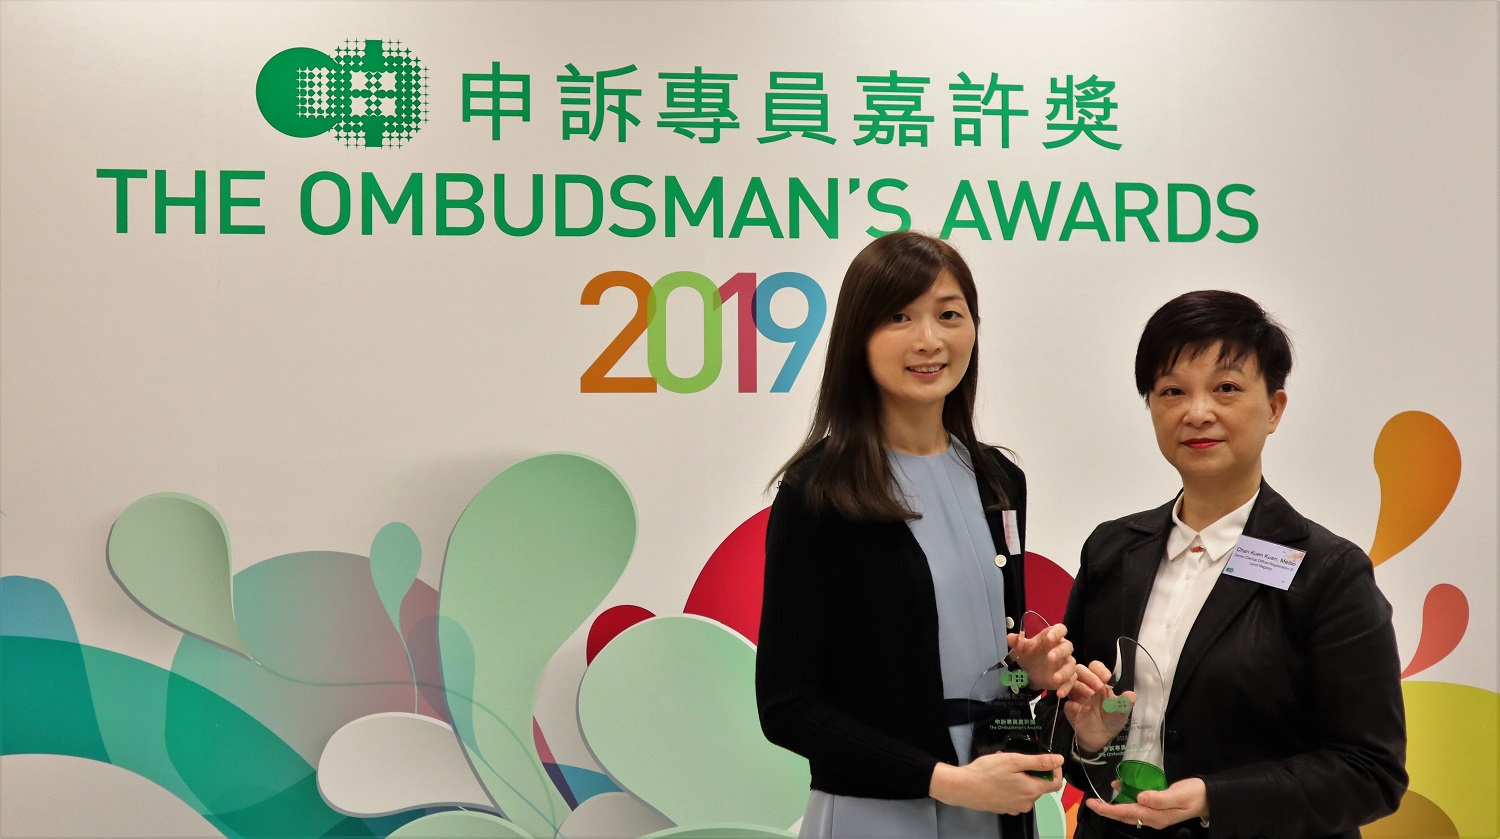 Ms WONG Ka-man, Carmen, Land Registration Officer I and Ms CHAN Kuen-kuen, Meibo, Senior Clerical Officer  were awarded The Ombudsman’s Awards 2019 for Officers of Public Organisations for their dedication in delivering quality customer services and handling complaints